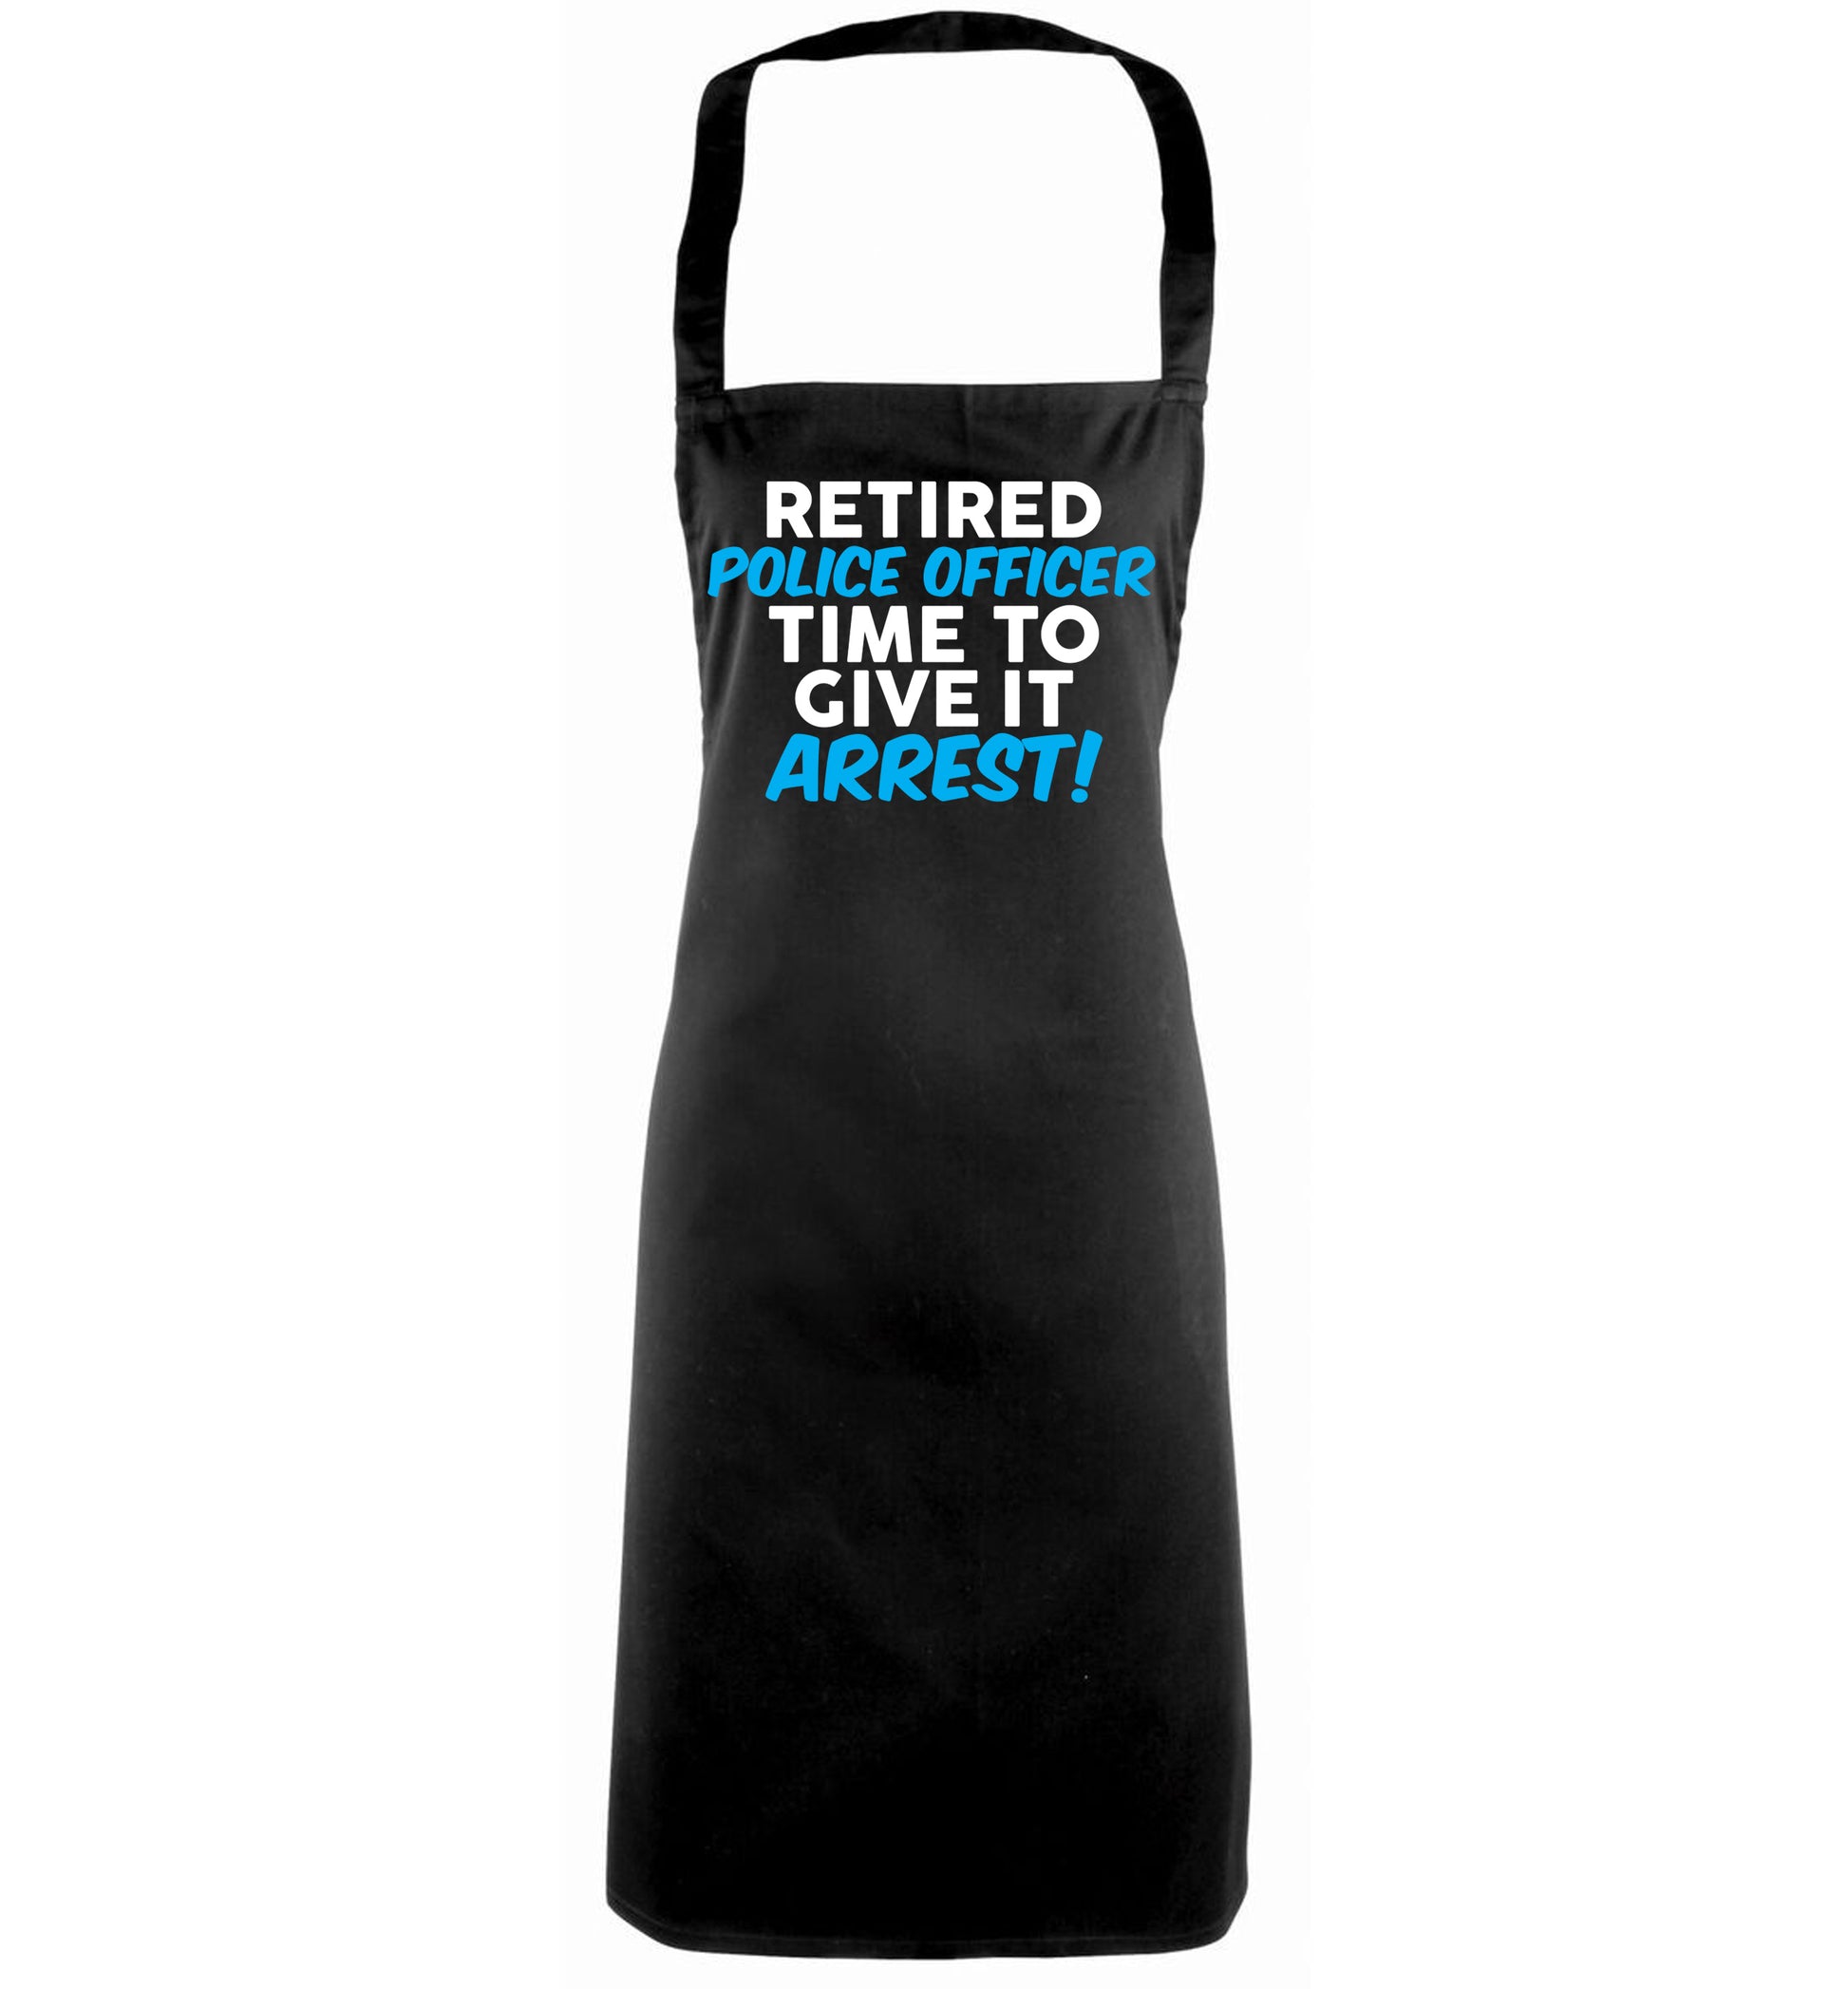 Retired police officer time to give it arrest black apron